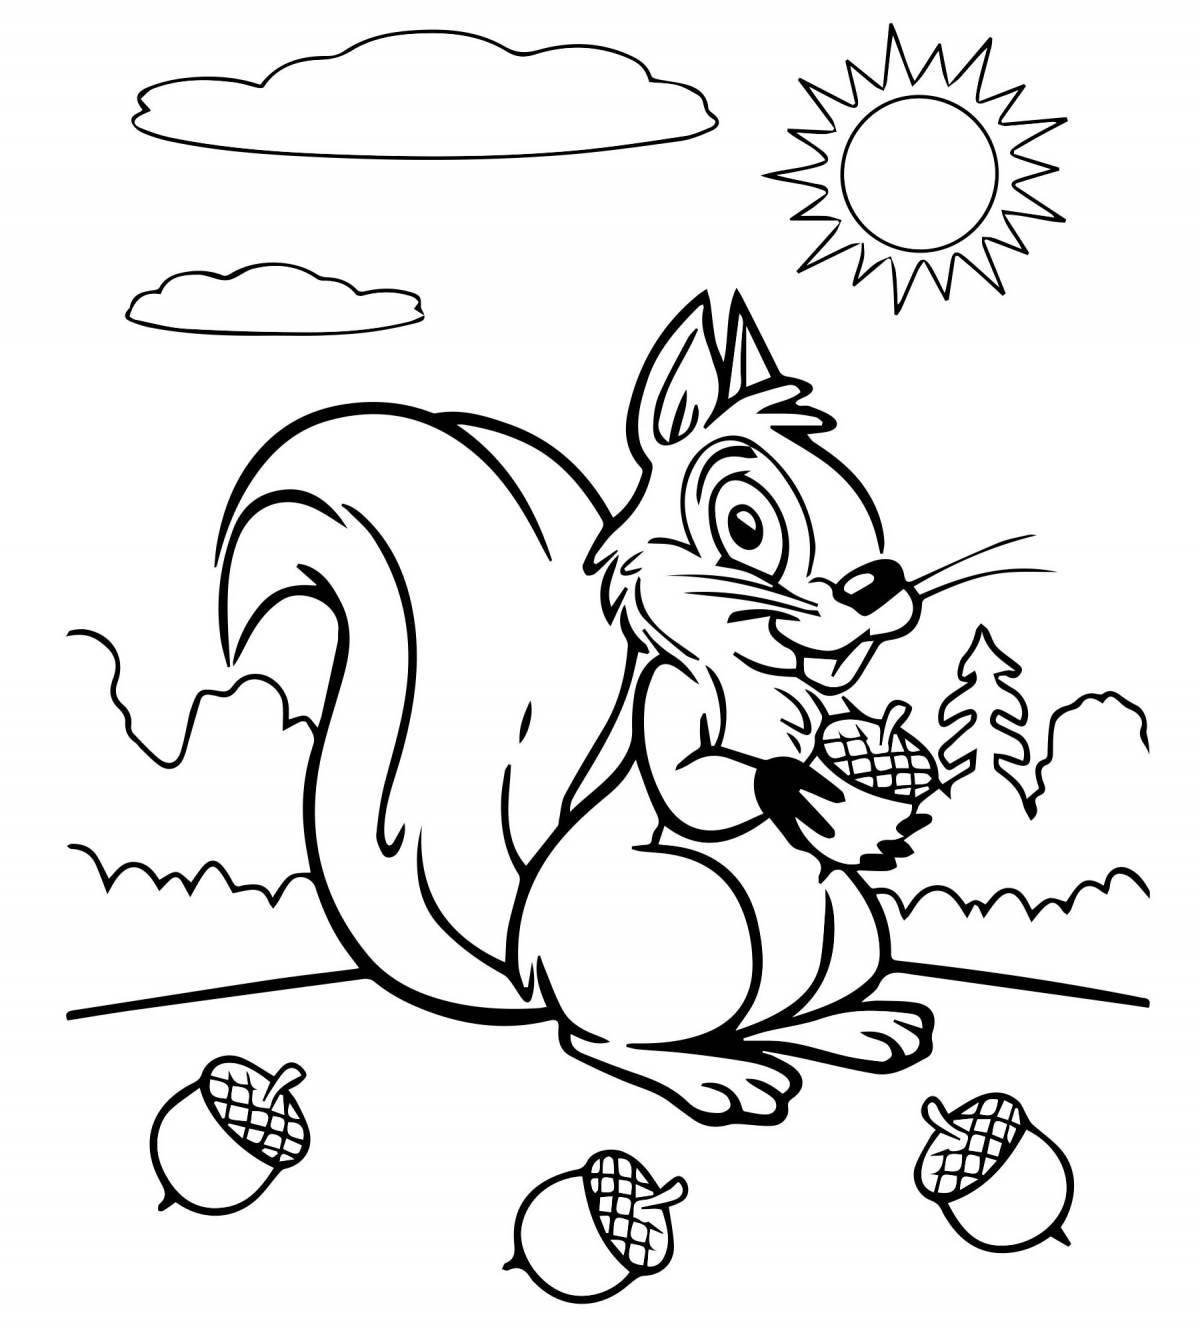 Grinning squirrel coloring page